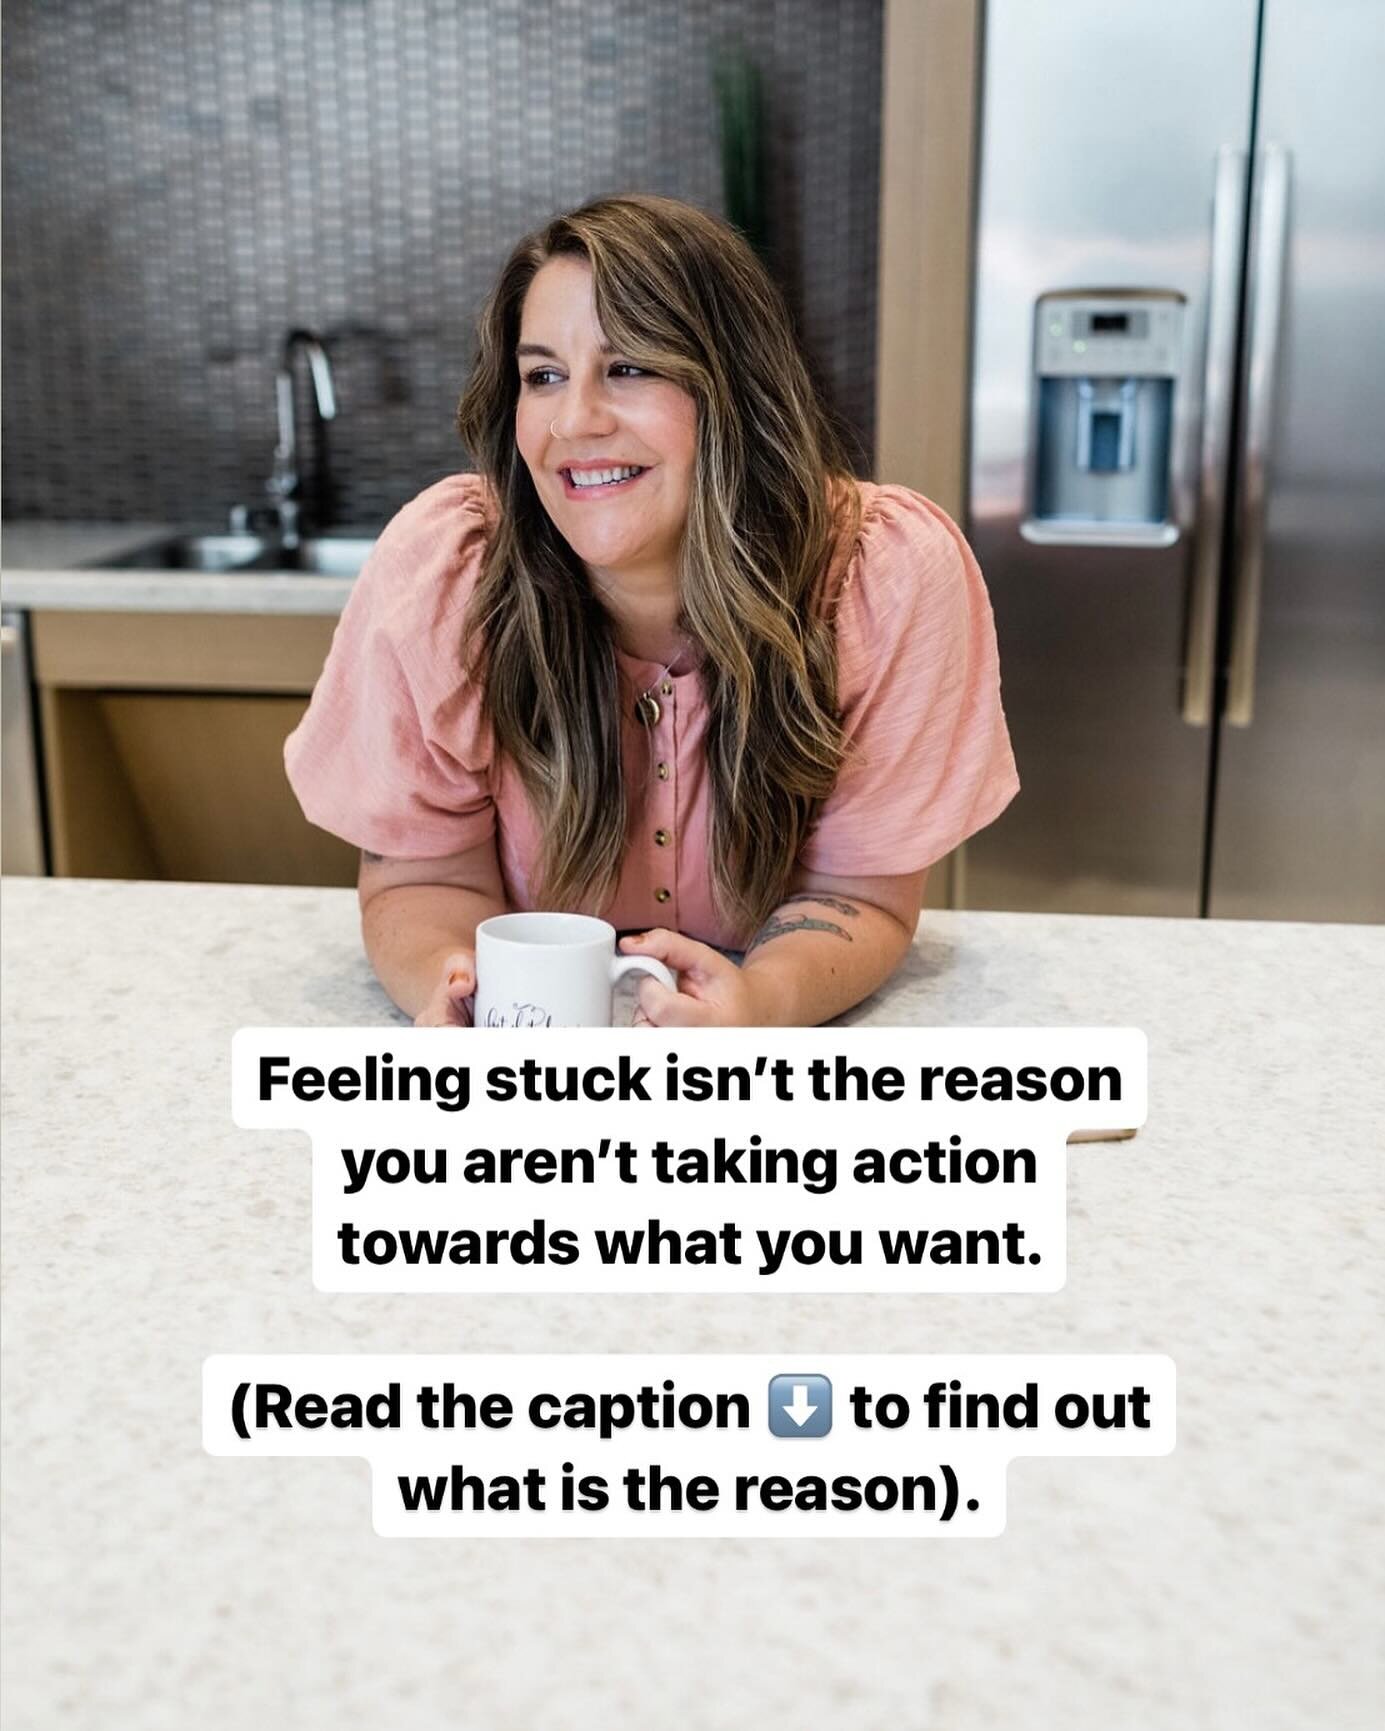 Feeling stuck isn&rsquo;t the reason you aren&rsquo;t taking action towards what you want.

Feeling stuck is a symptom of you not trusting yourself to know what the next step is and thinking that there&rsquo;s only one right way to get there.

As a w